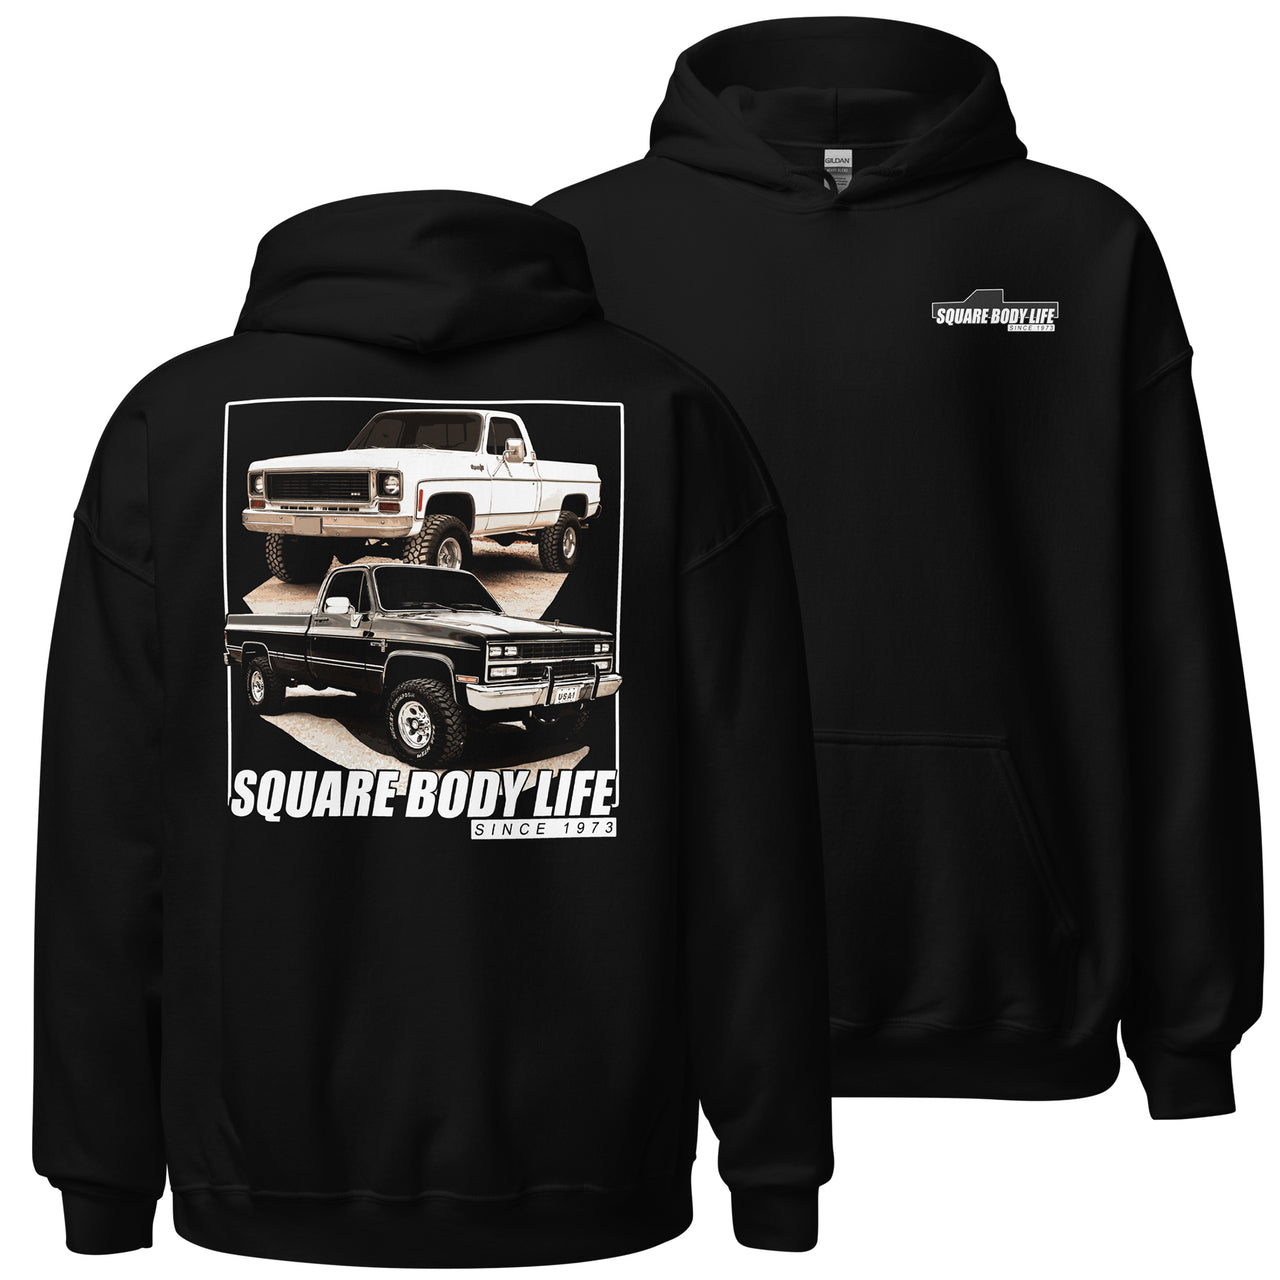 Square Body Life Hoodie in black